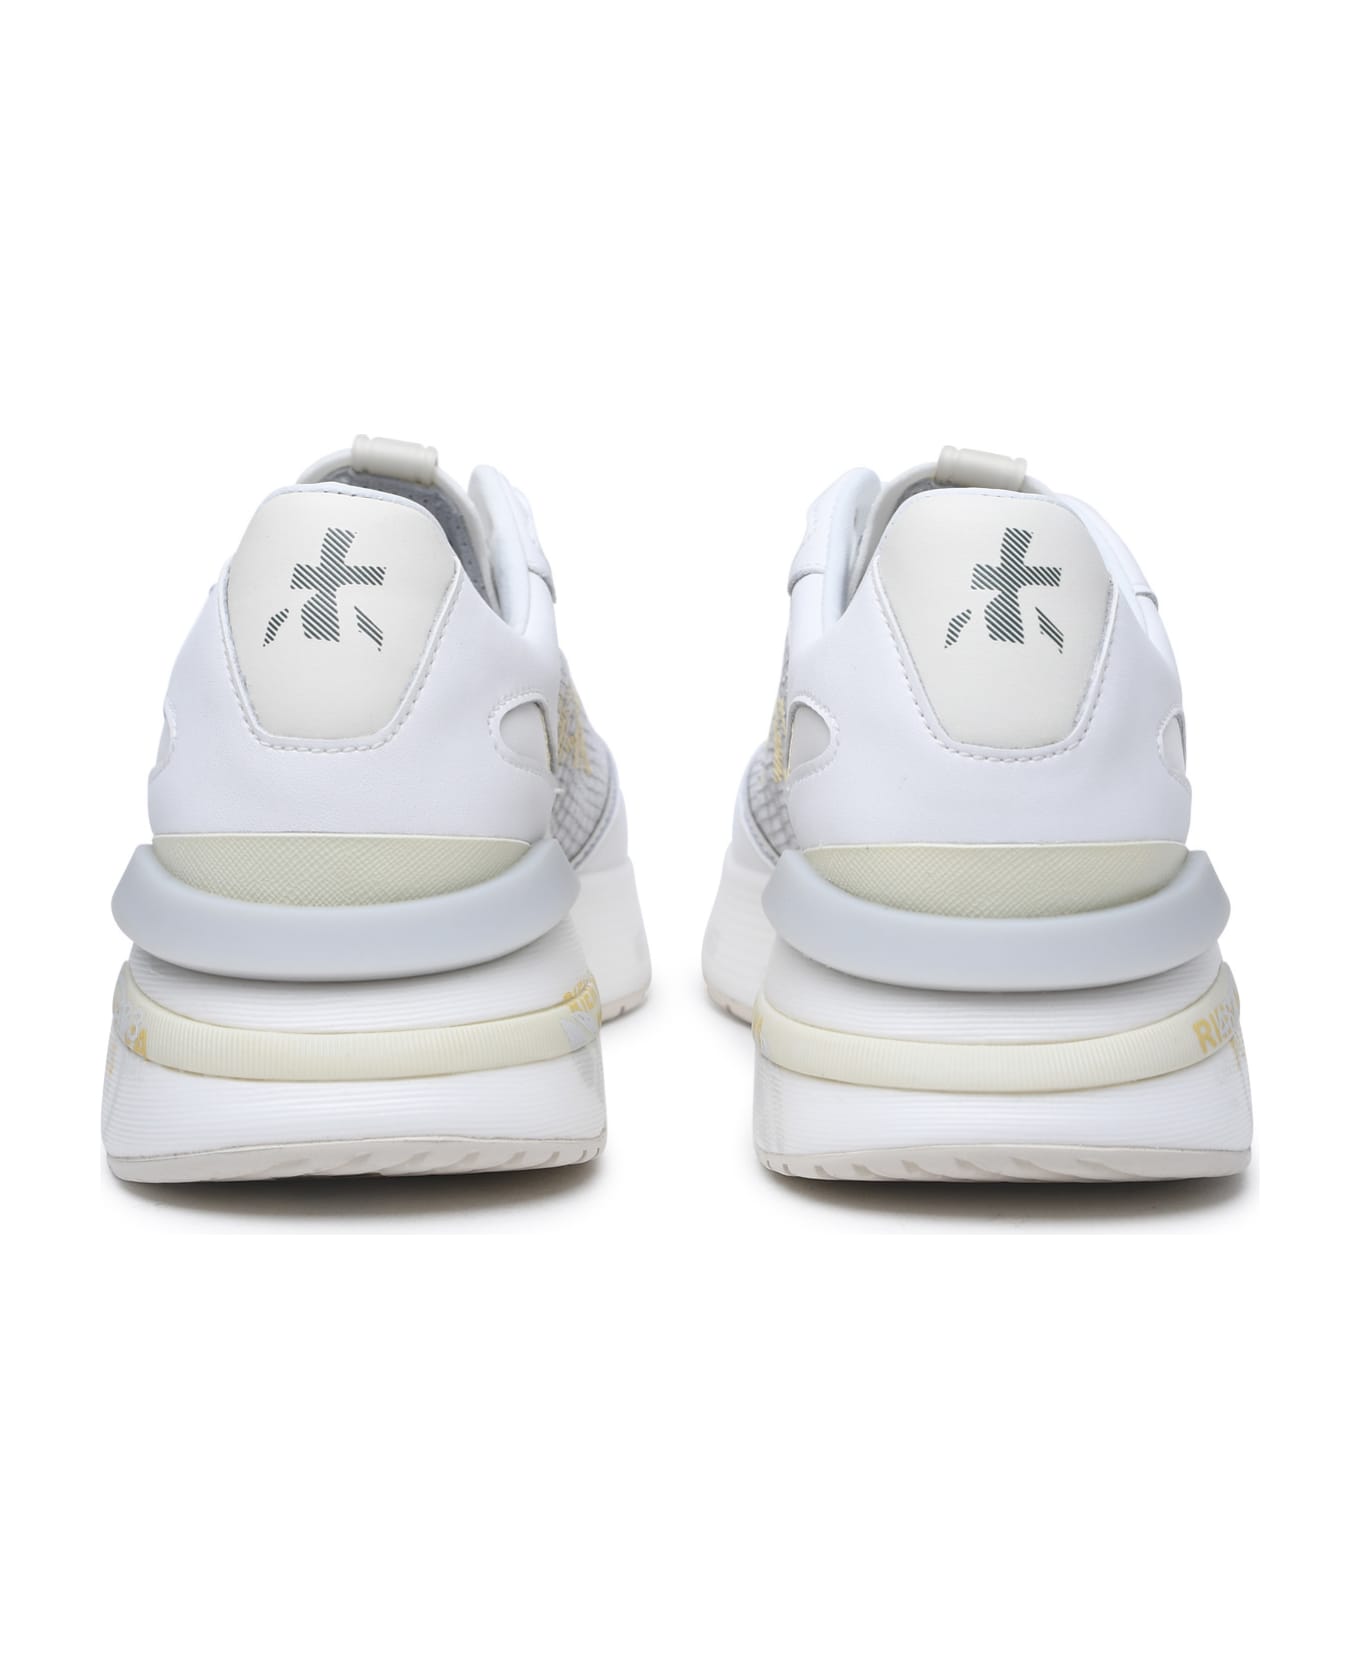 Premiata 'moerund' Sneakers In Leather And White Fabric - Bianco スニーカー